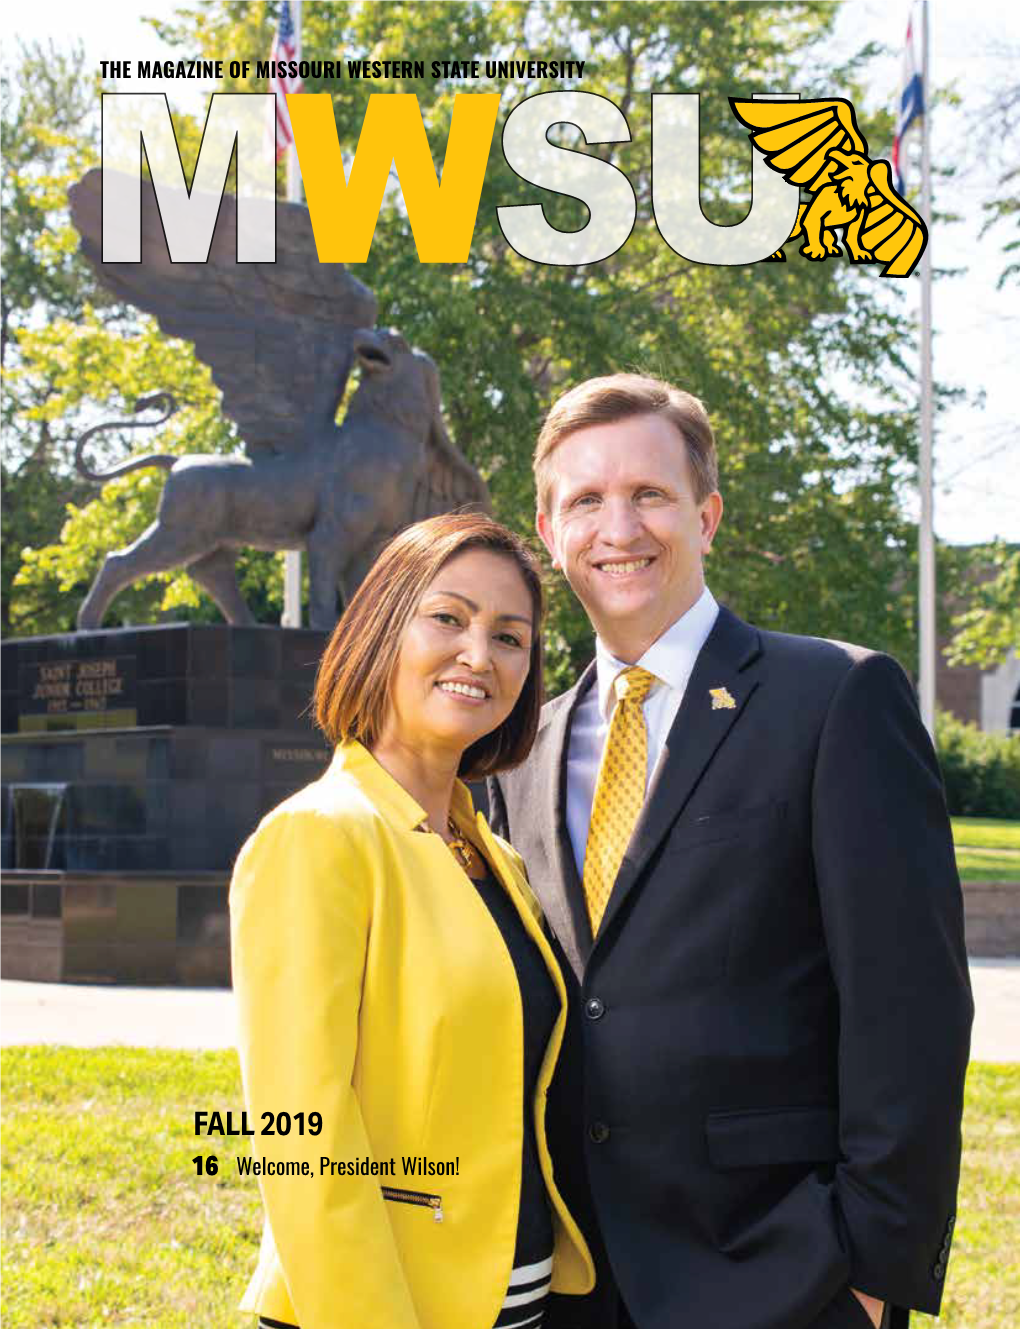 FALL 2019 16 Welcome, President Wilson!